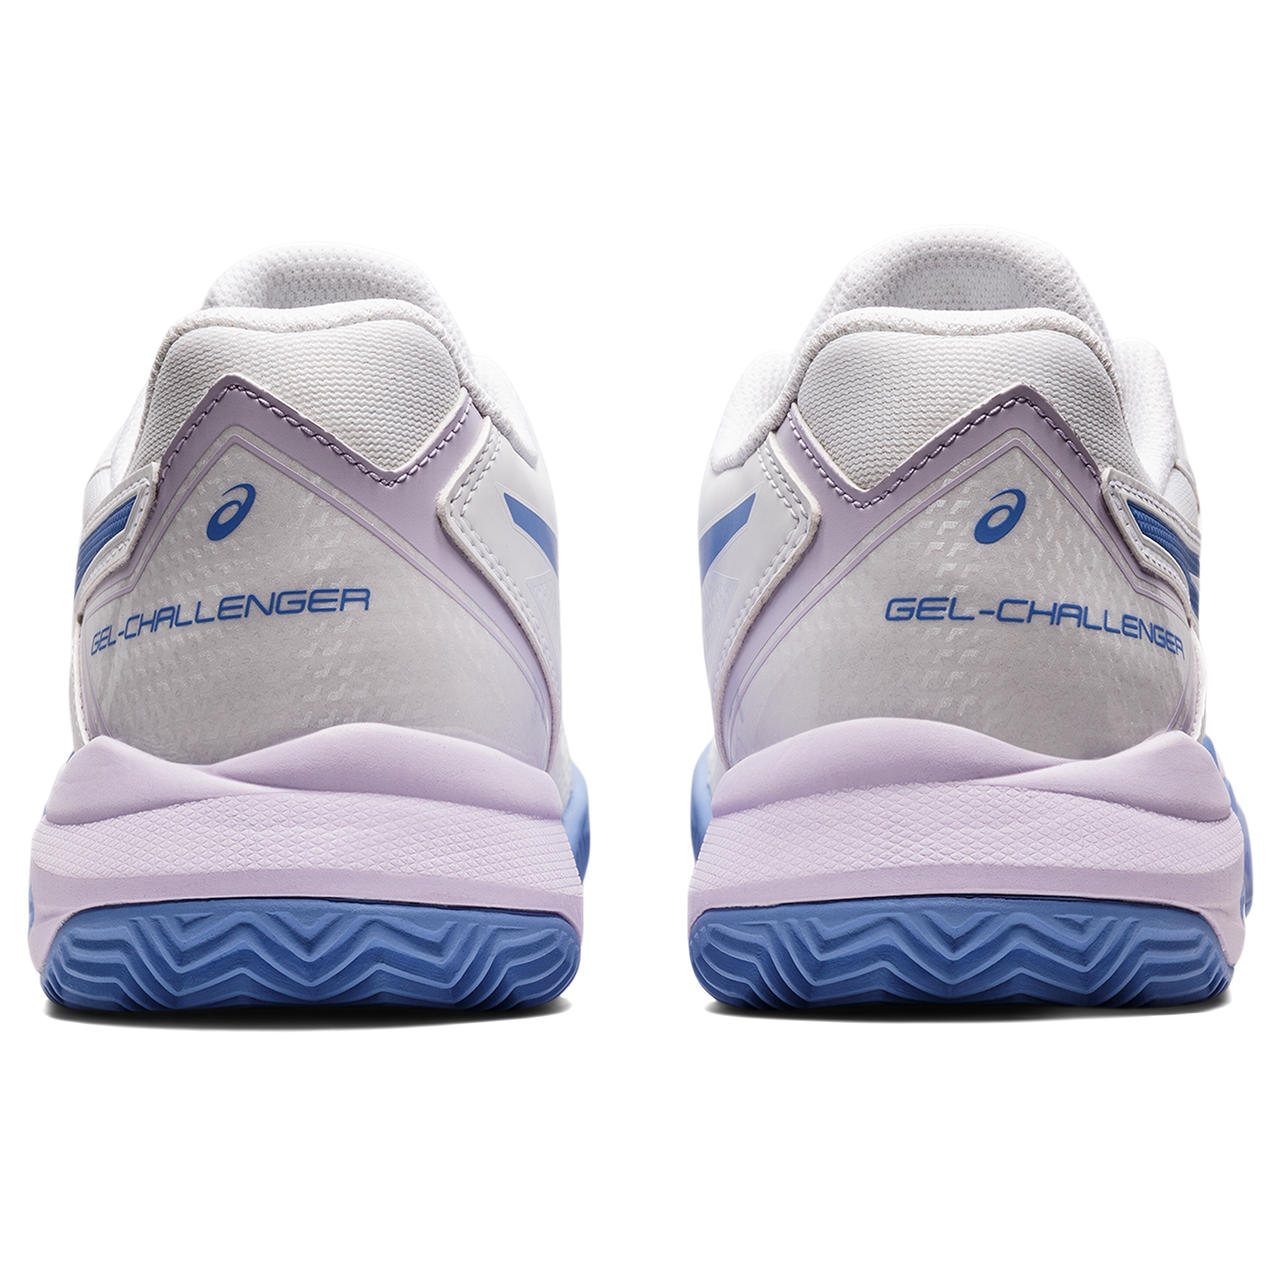 Women’s shoes Asics Gel-Challenger 13 Clay - white/periwinkle blue ...